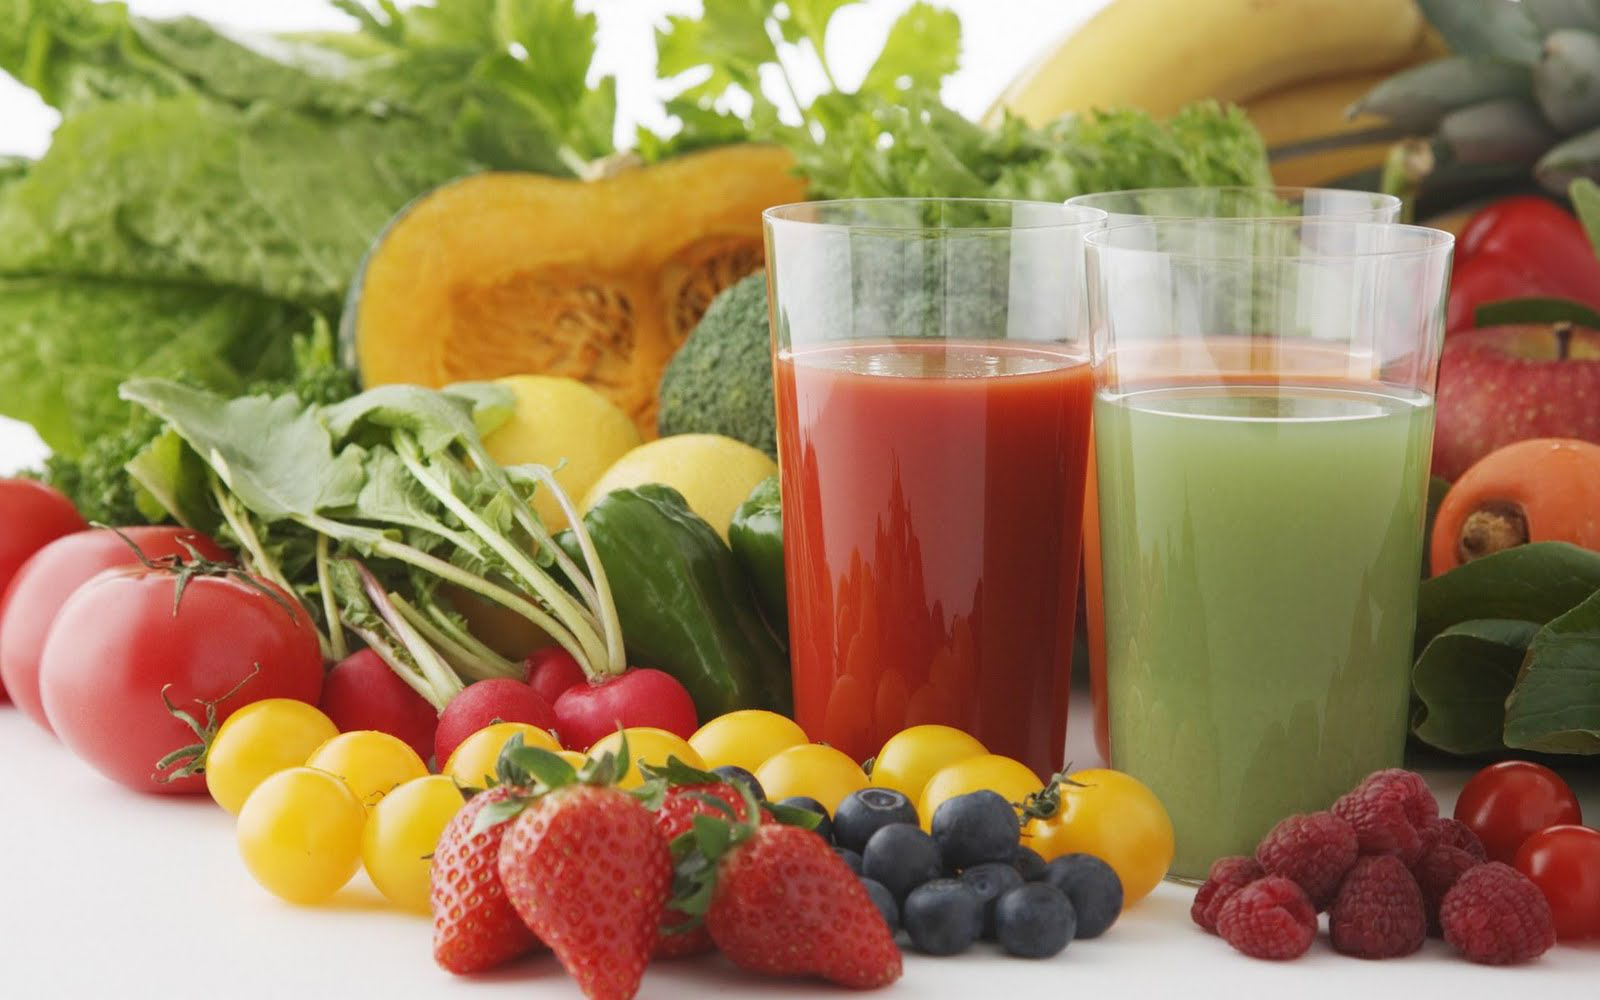 Juicing

Juicing fresh fruits and veggies removes all of the fiber that keeps you feeling full and satisfied until your next meal. What you do keep is the sugar. High-sugar, low-protein foods mean constant hunger pangs, mood swings and low energy.